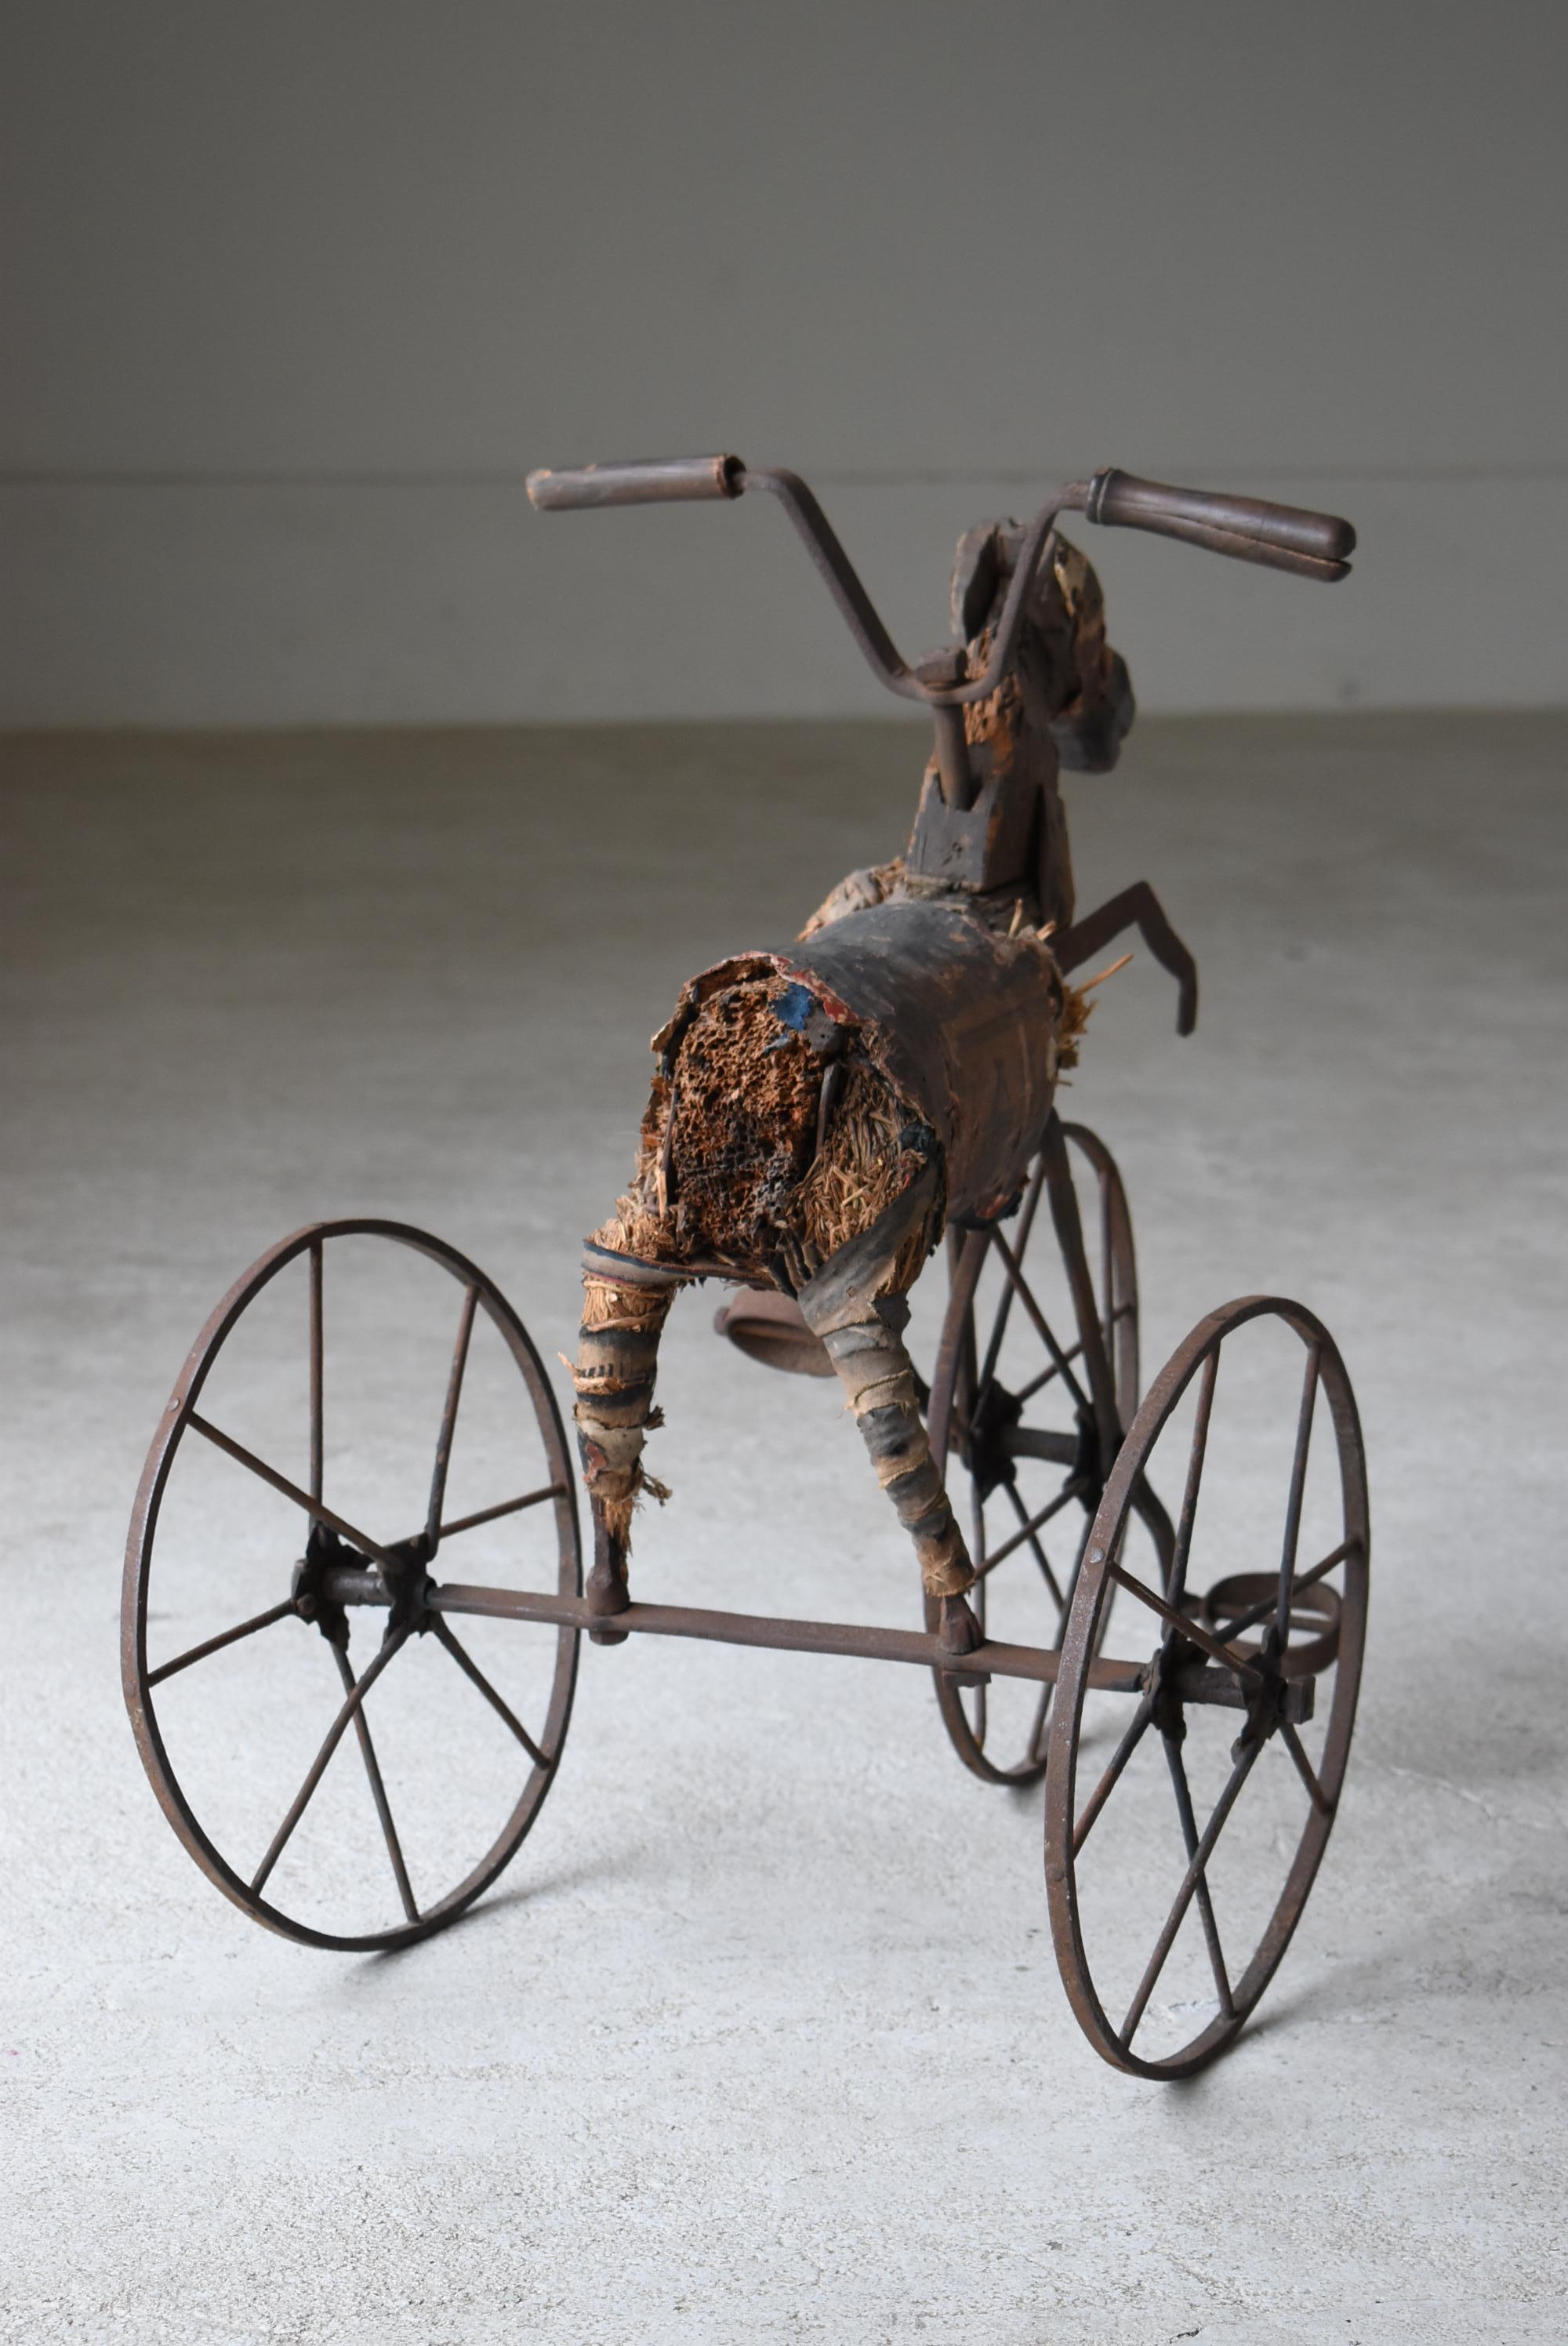 Japanese Antique Wooden Horse Tricycle 1860s-1900s / Sculpture Wabisabi  For Sale 3